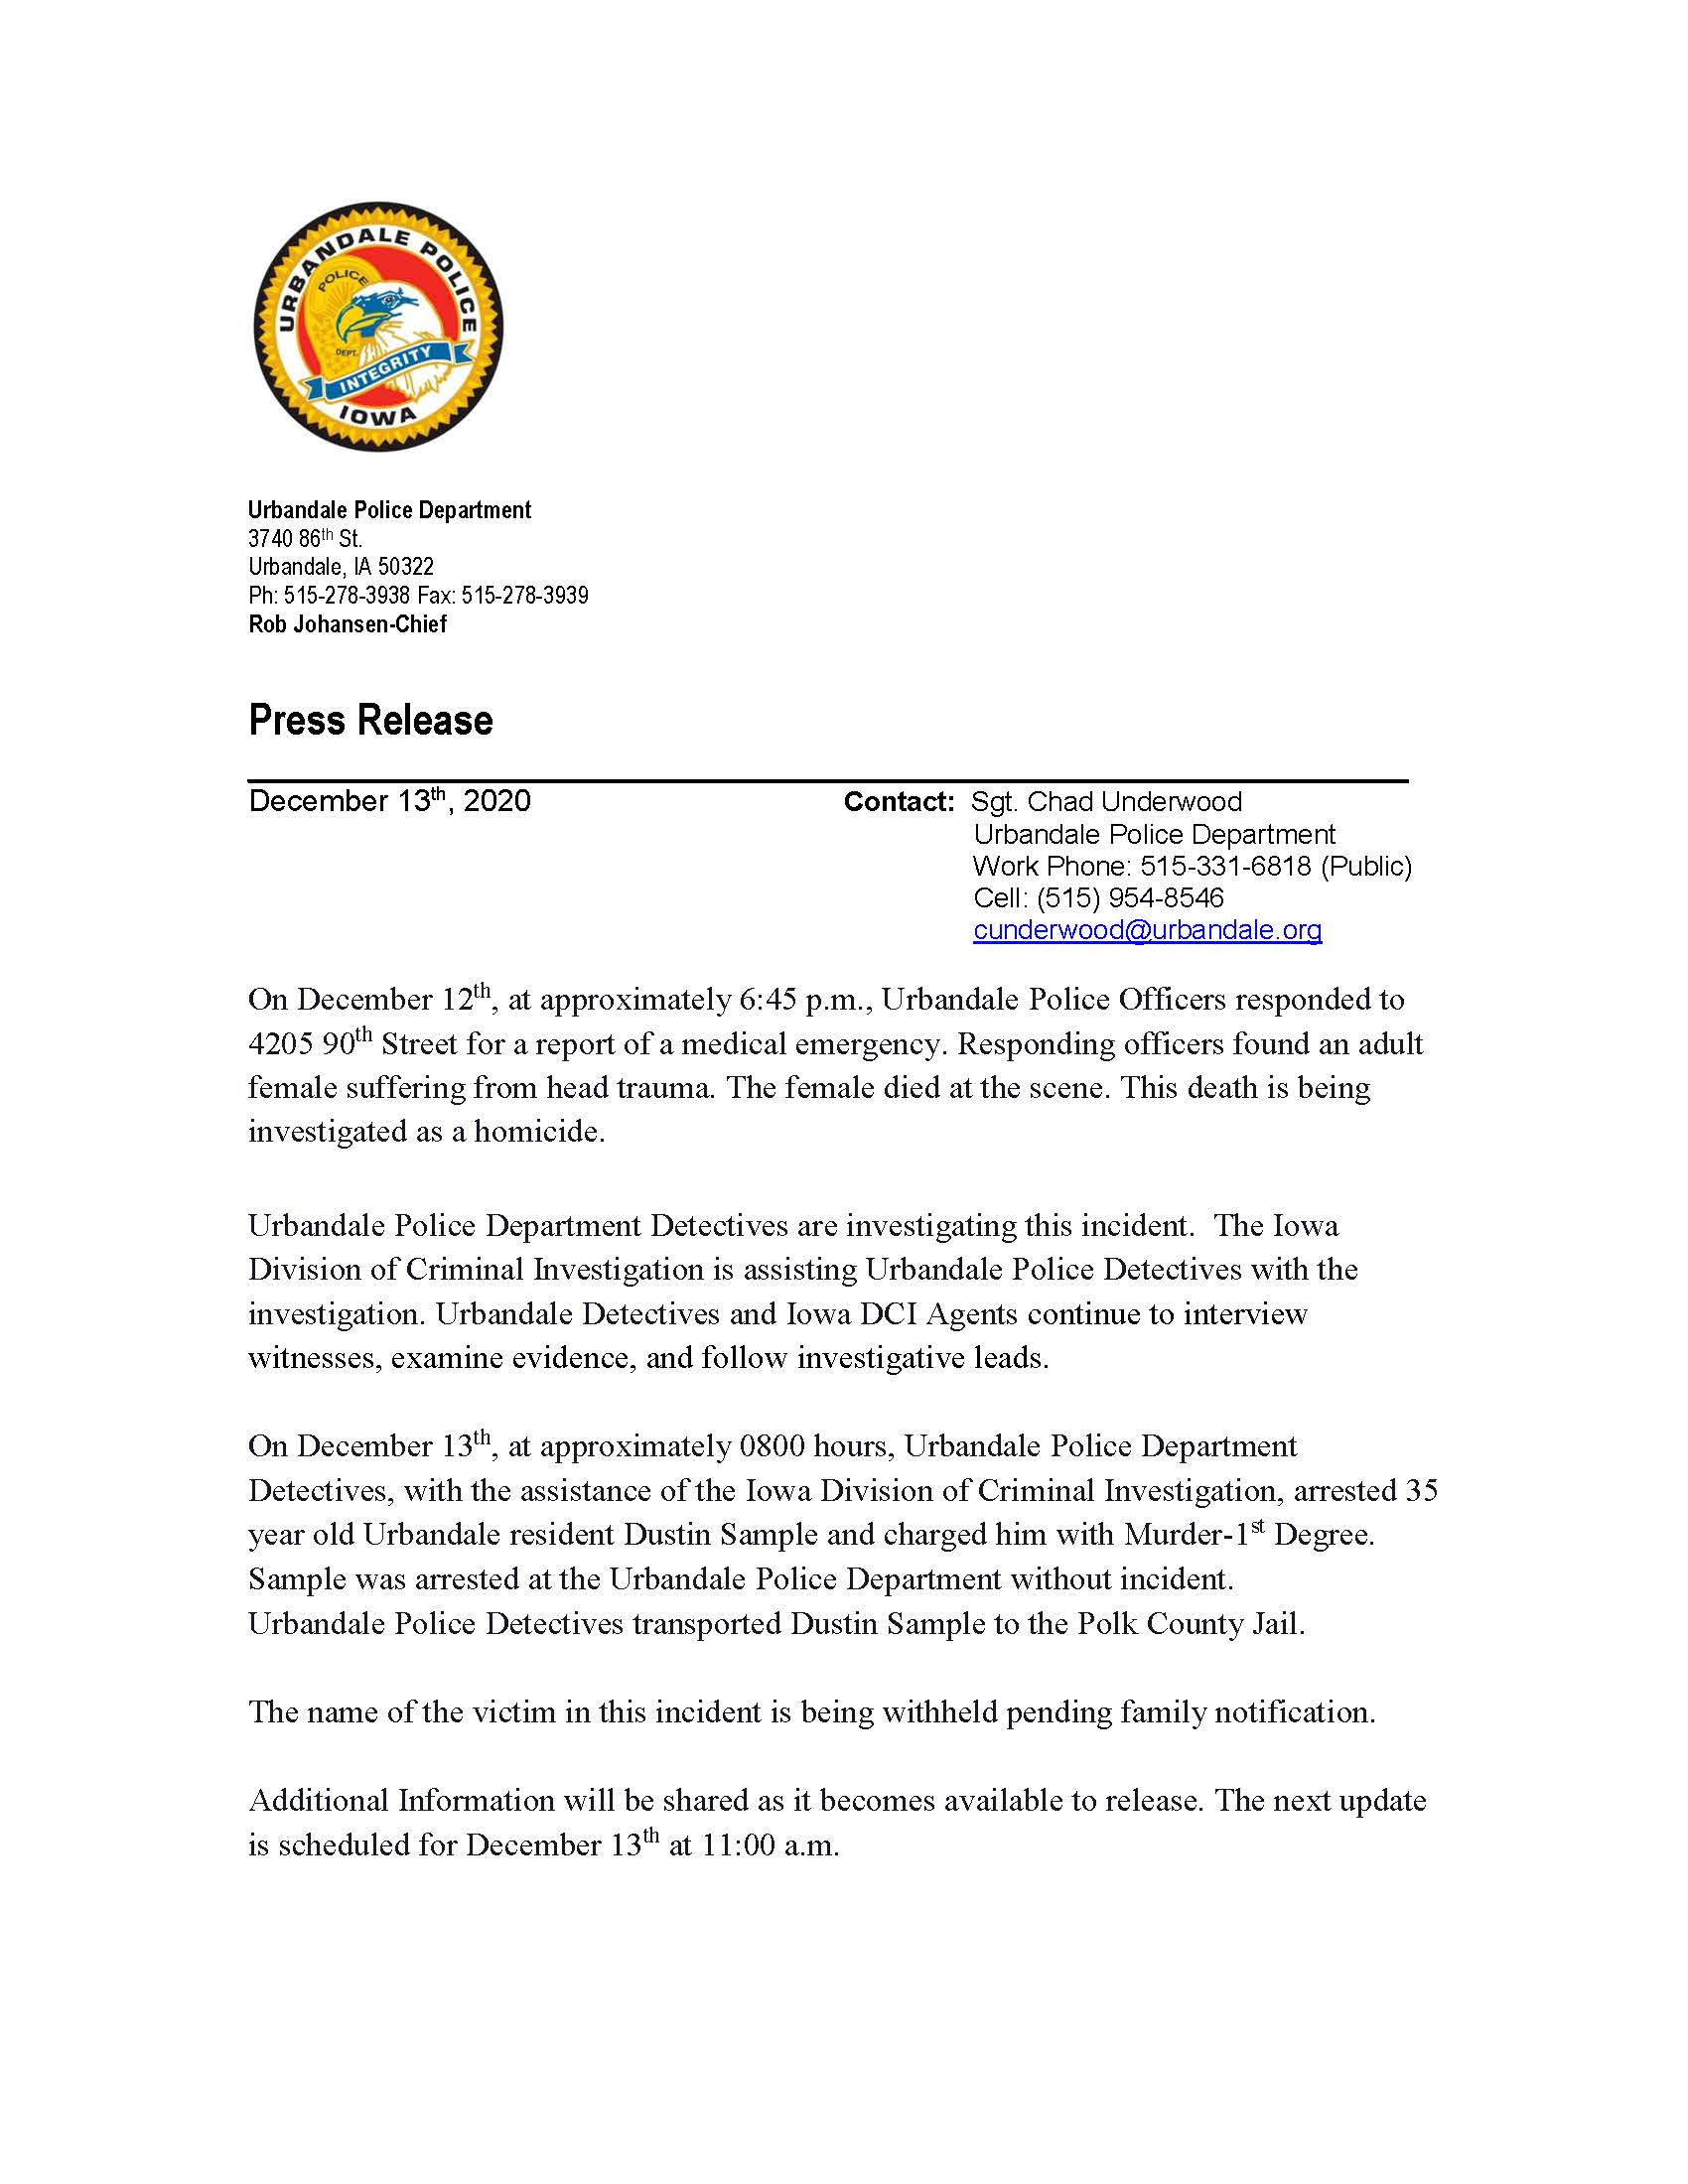 LInk to Urbandale PD press release